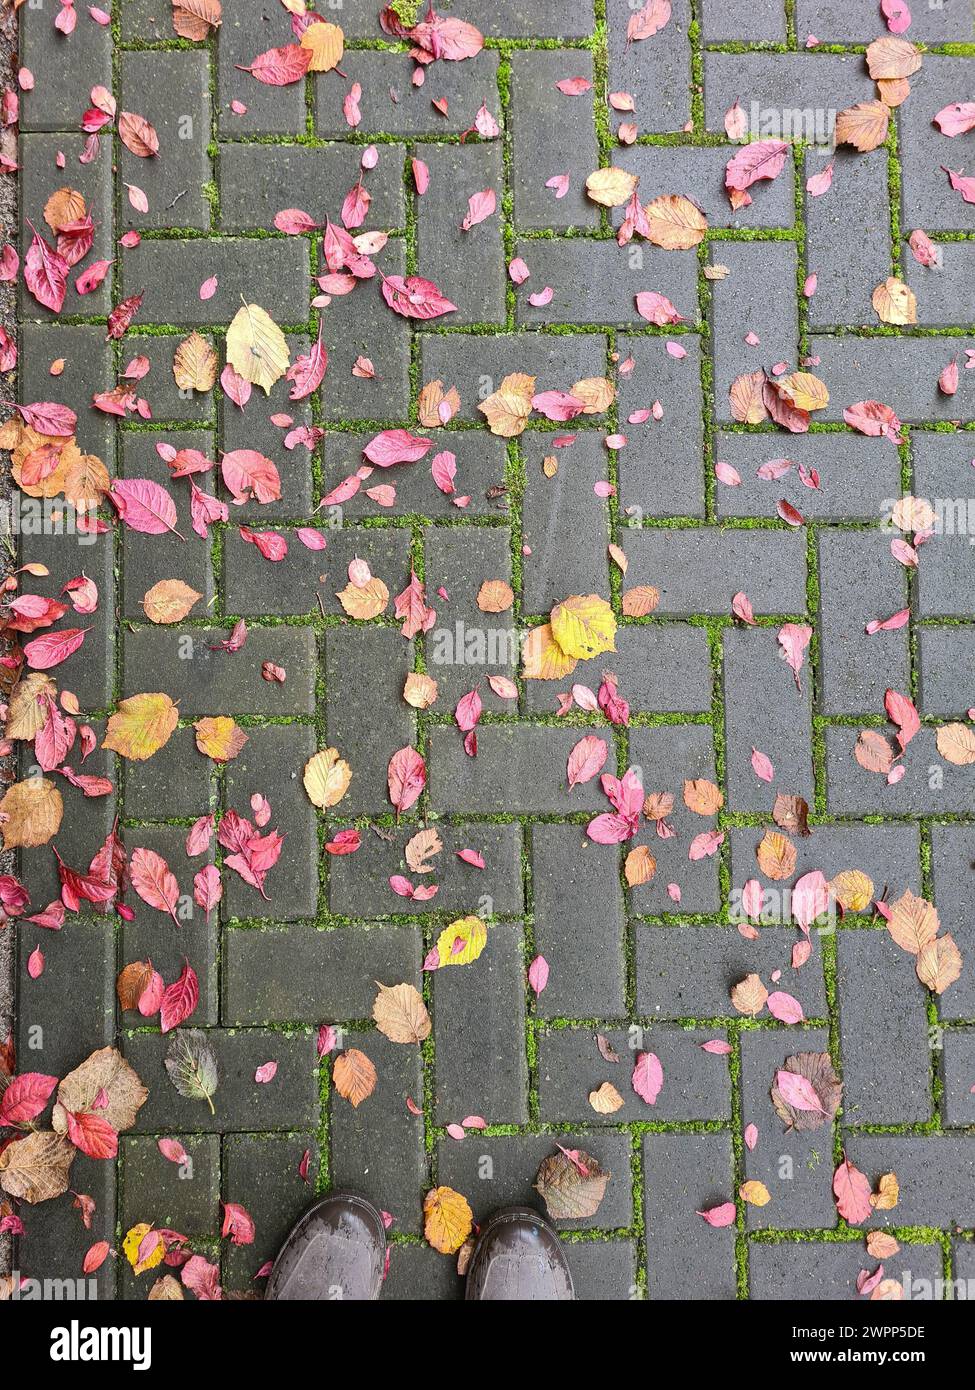 Various colorful autumn leaves from the cherry tree and the Japanese plum tree as well as hazelnut leaves have fallen on the paving stones with moss after a rain shower, rubber boots in the foreground at the edge of the picture Stock Photo